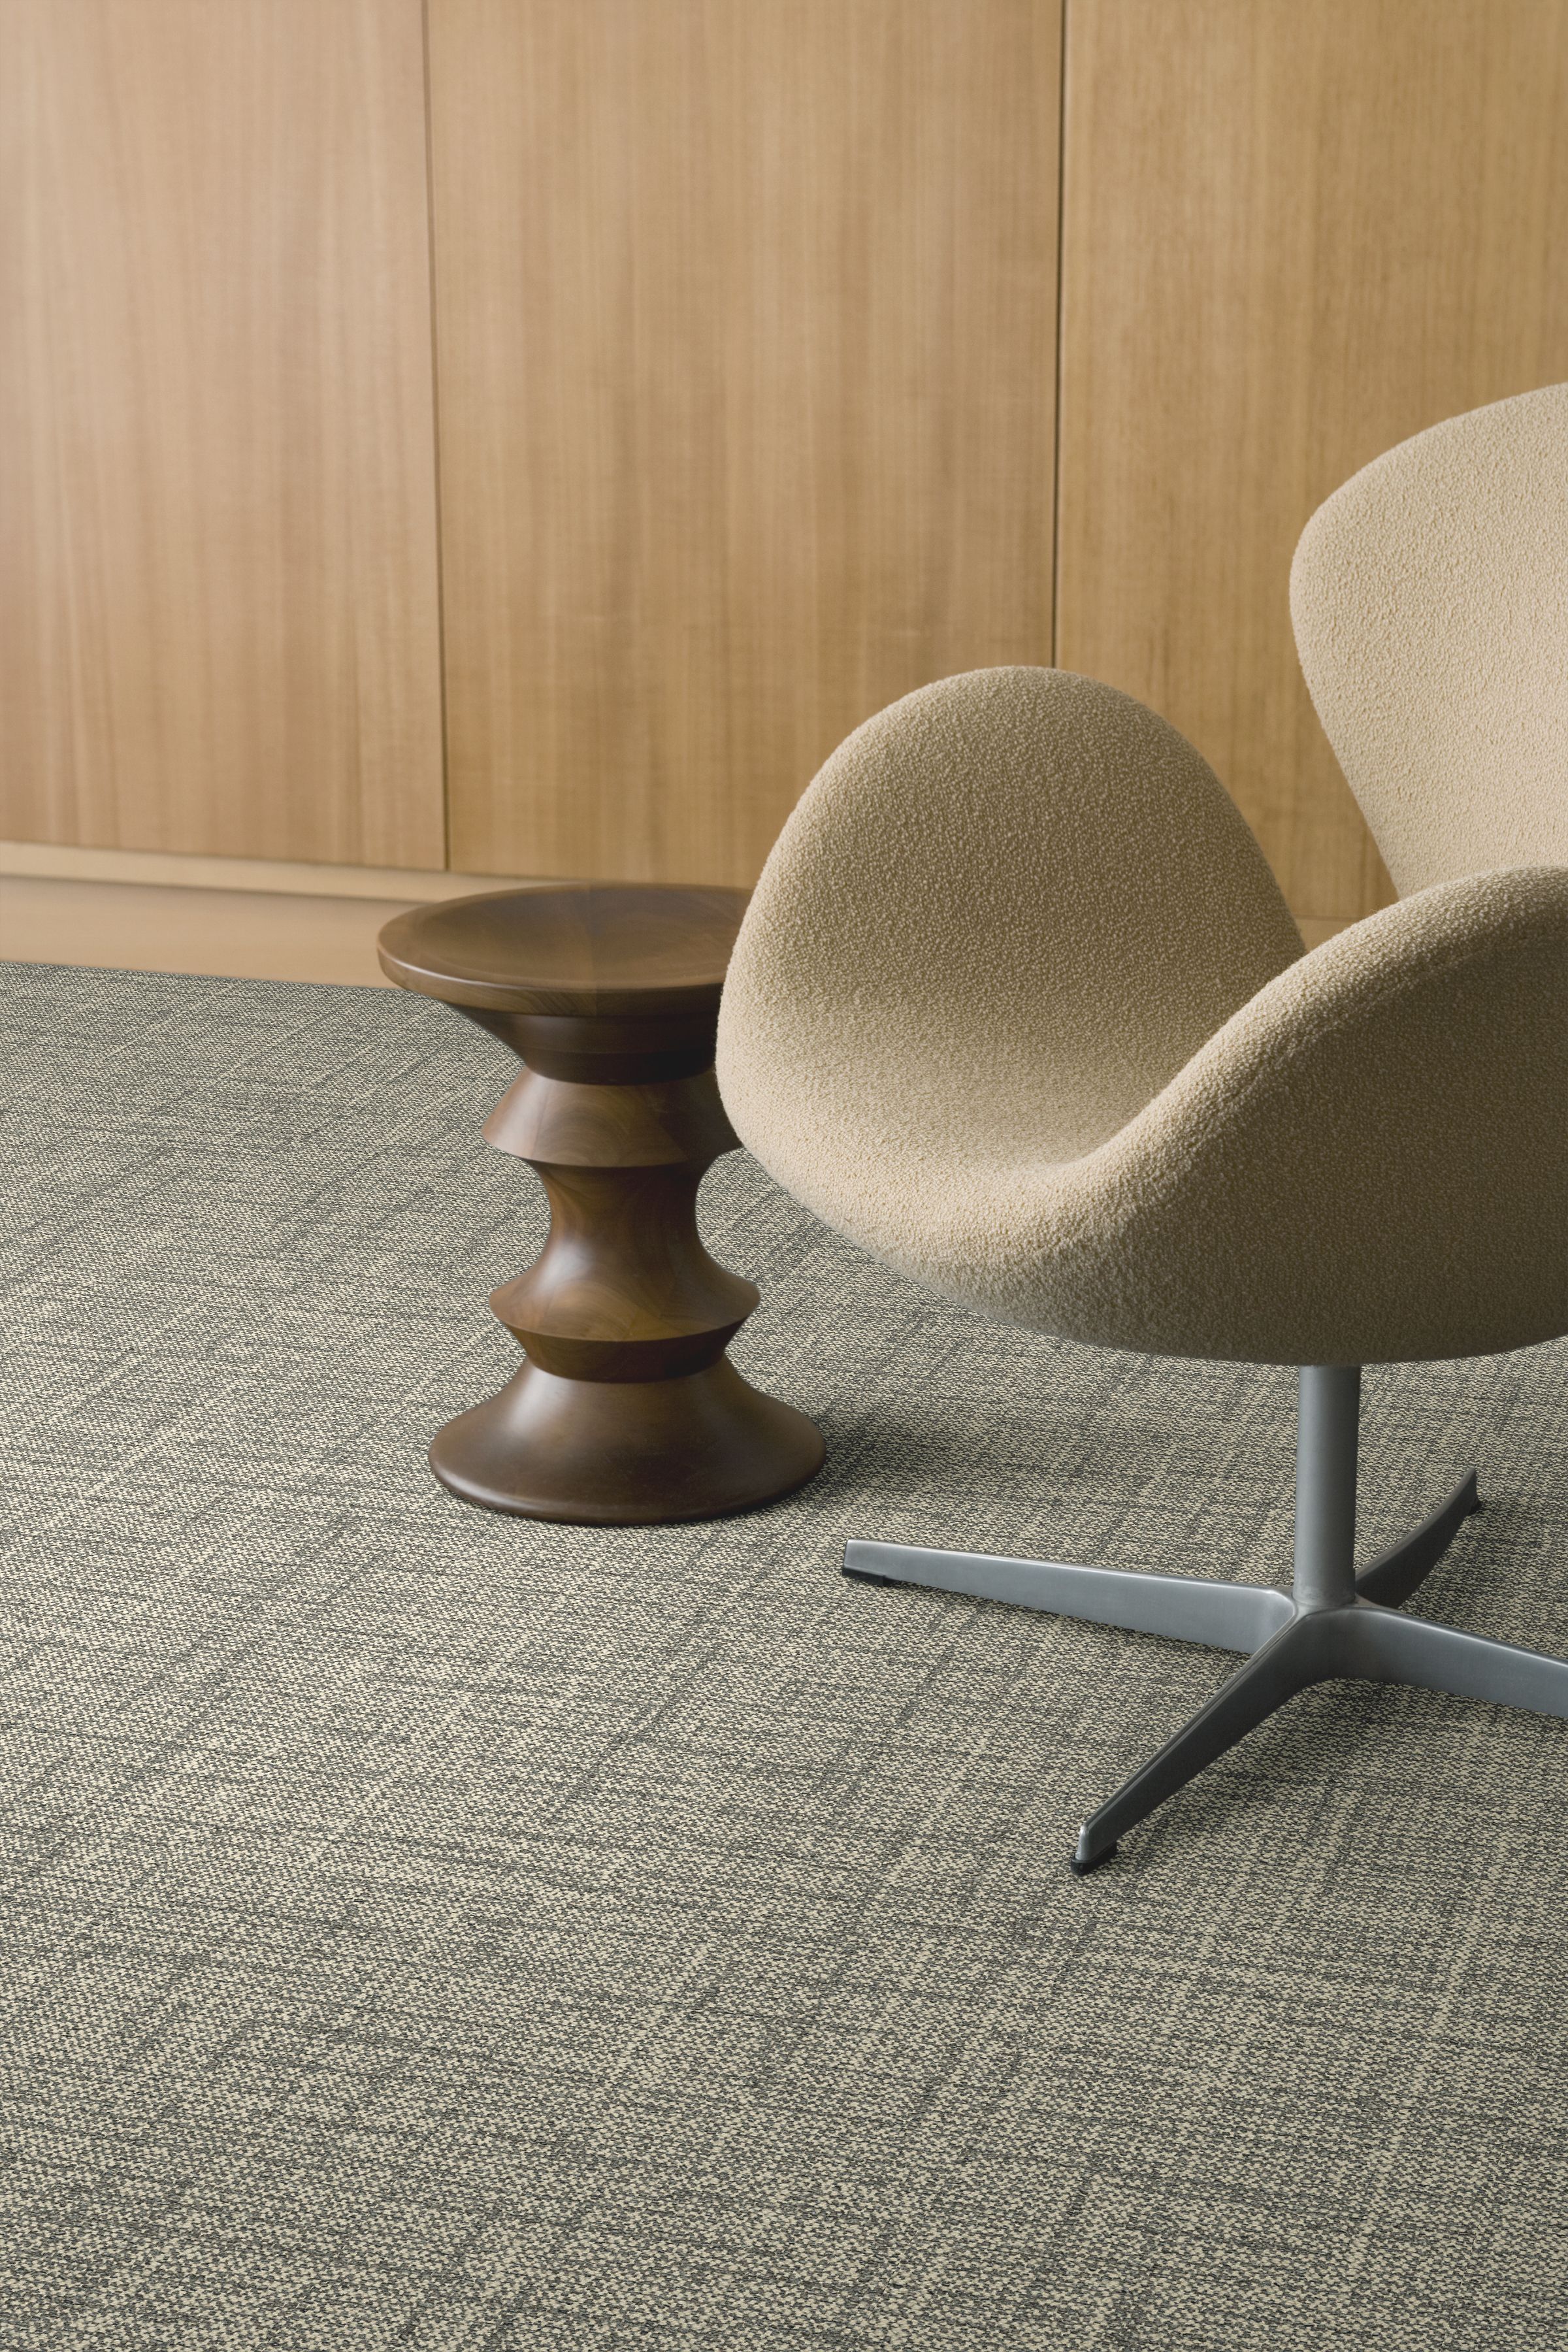 Interface Diminuendo plank carpet tile in close up with chair and small side table numéro d’image 4